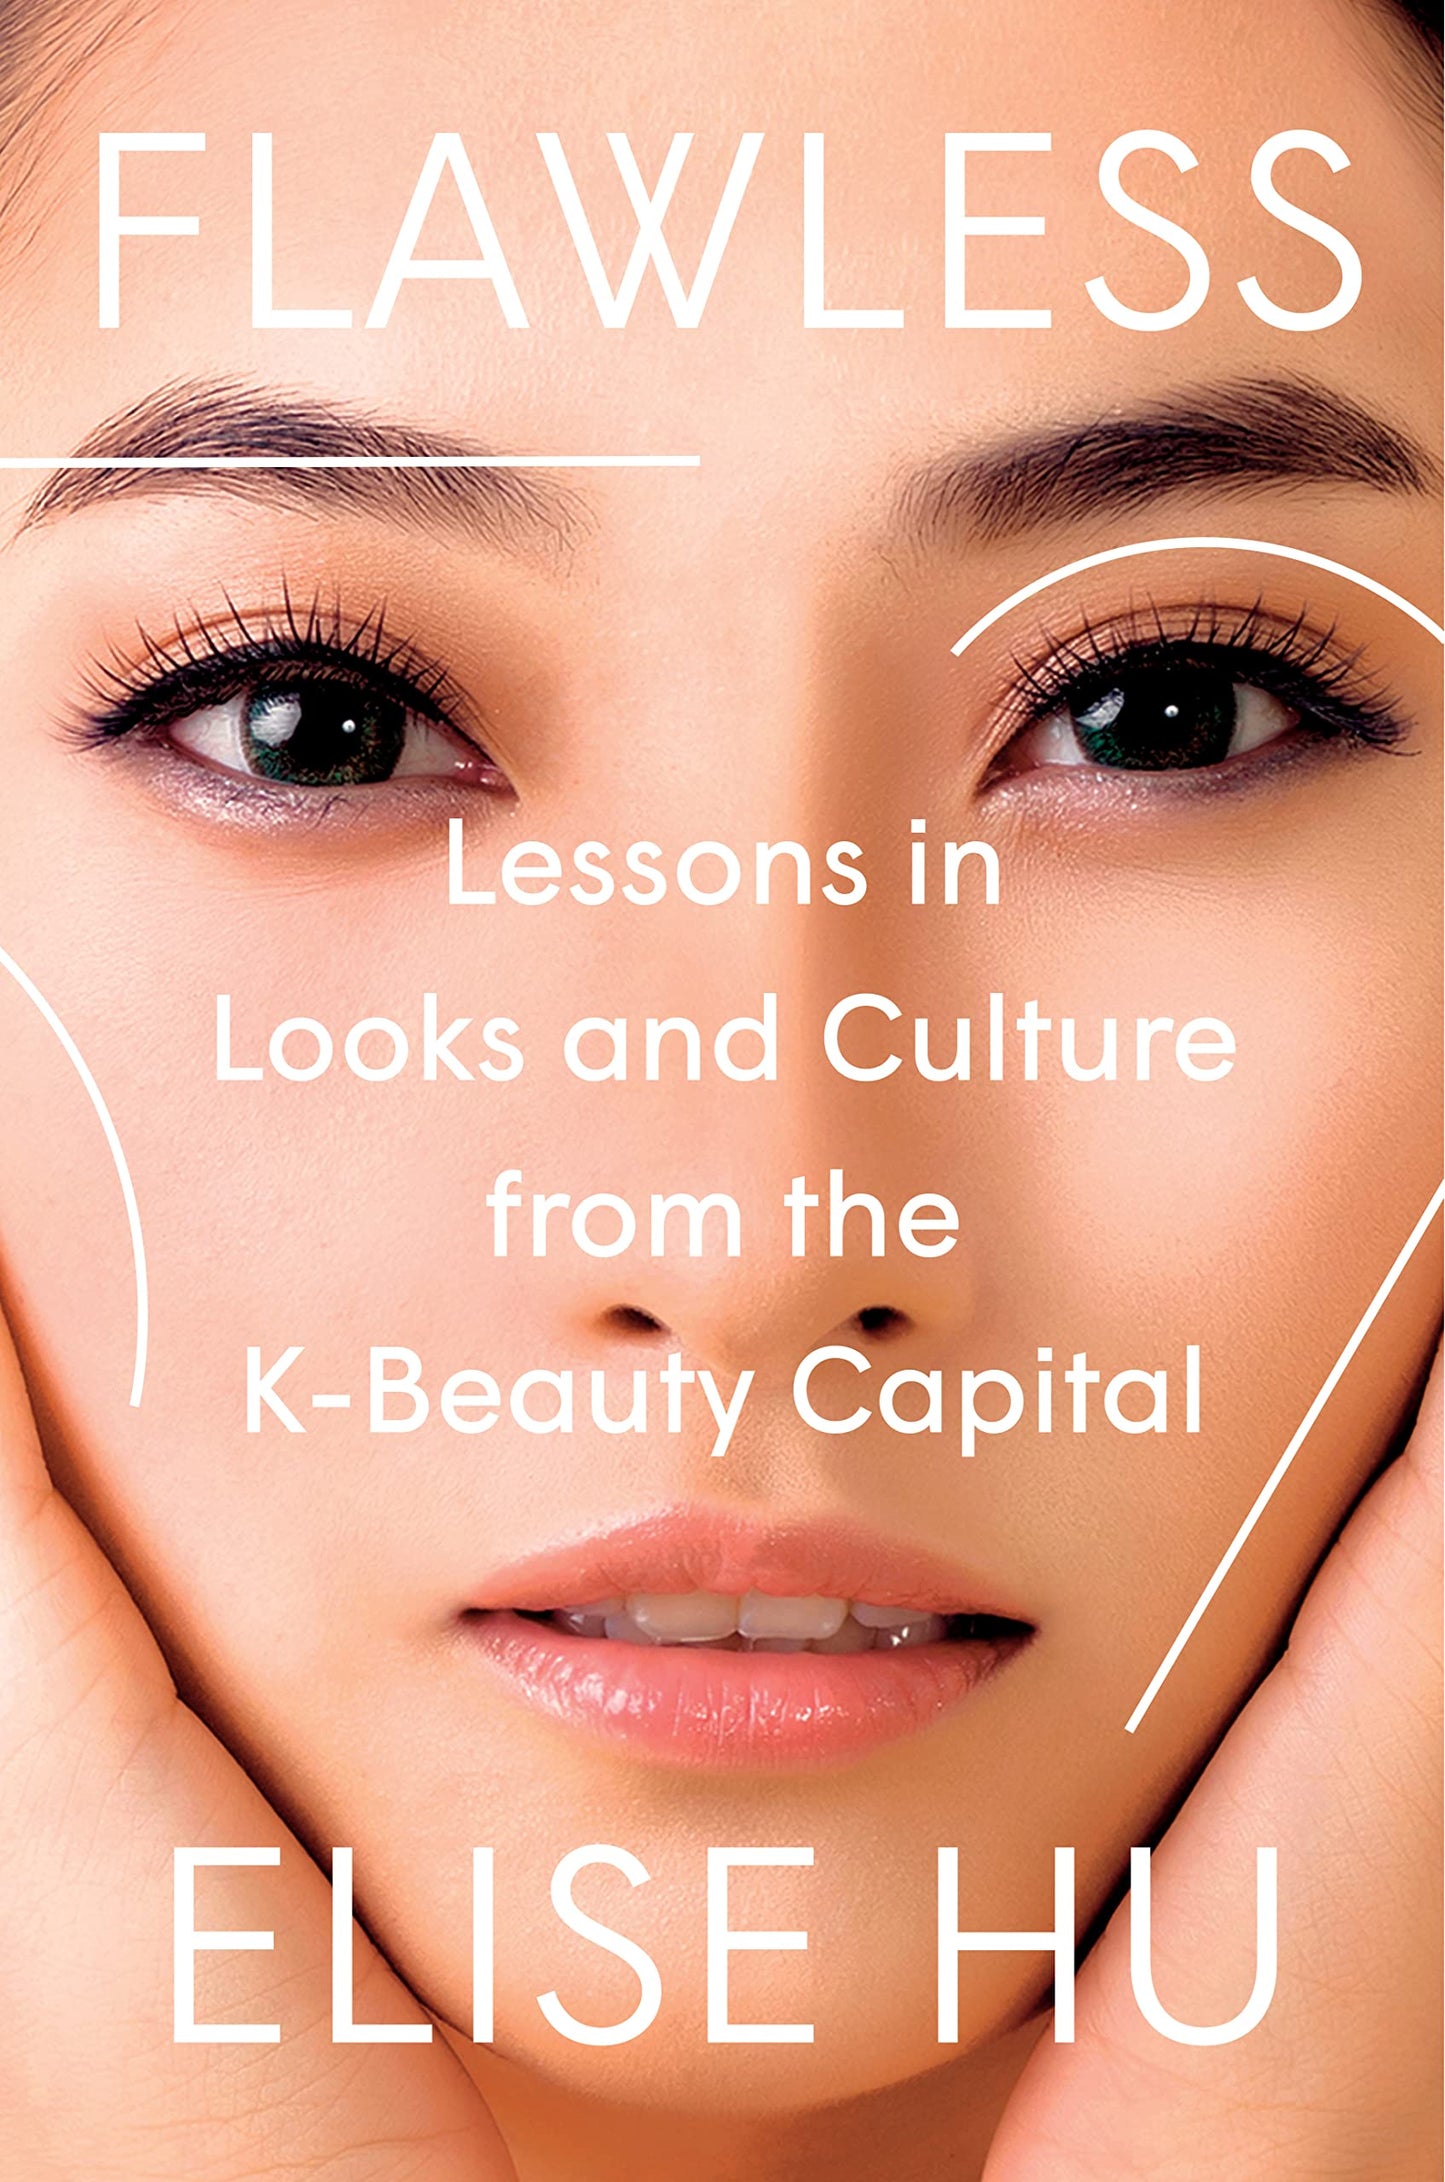 Flawless // Lessons in Looks and Culture from the K-Beauty Capital